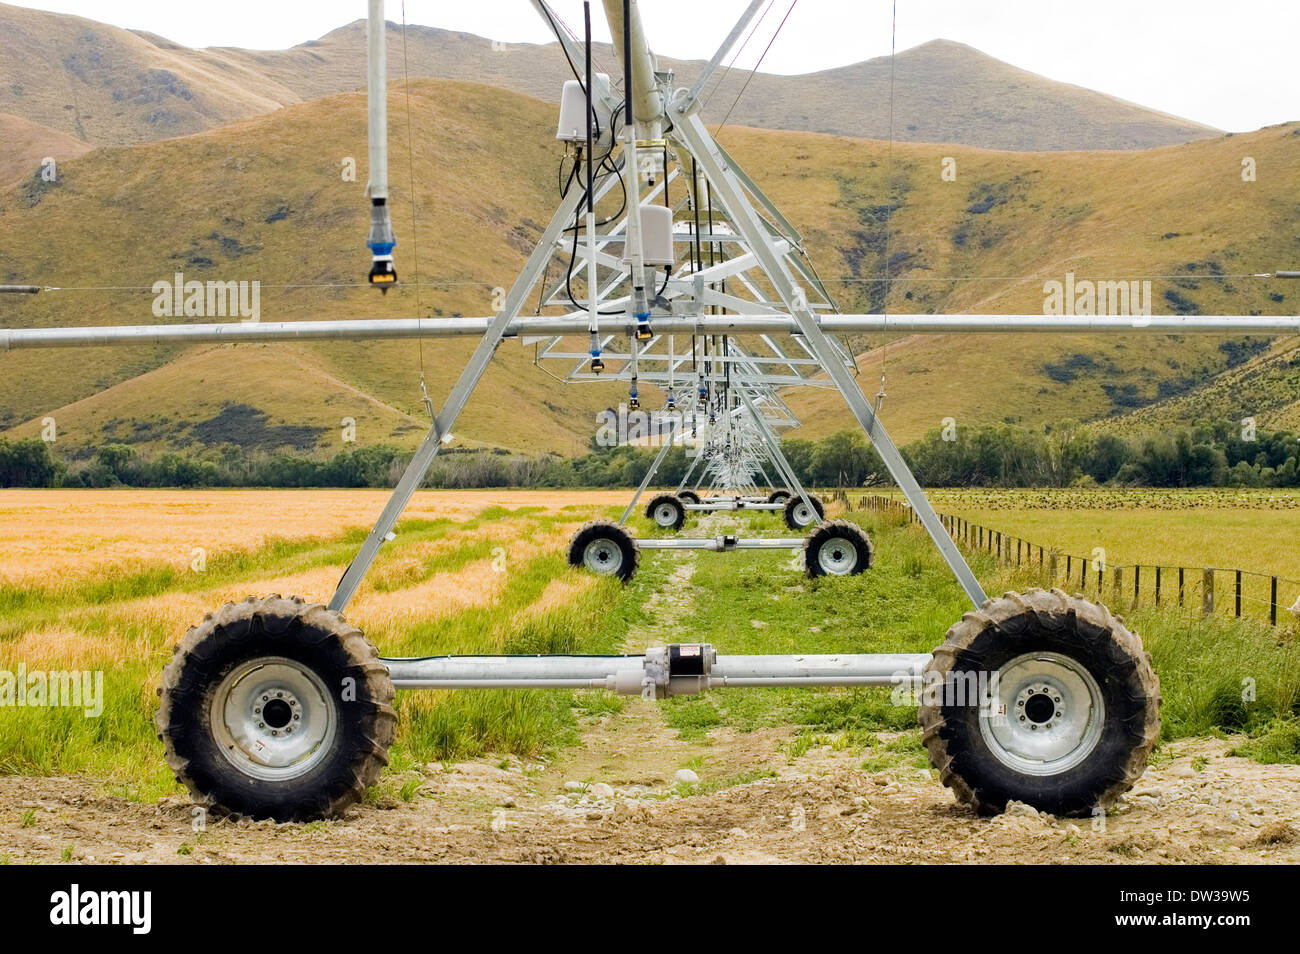 Irrigation wheeled system watering fields or crops in New Zealand Stock Photo